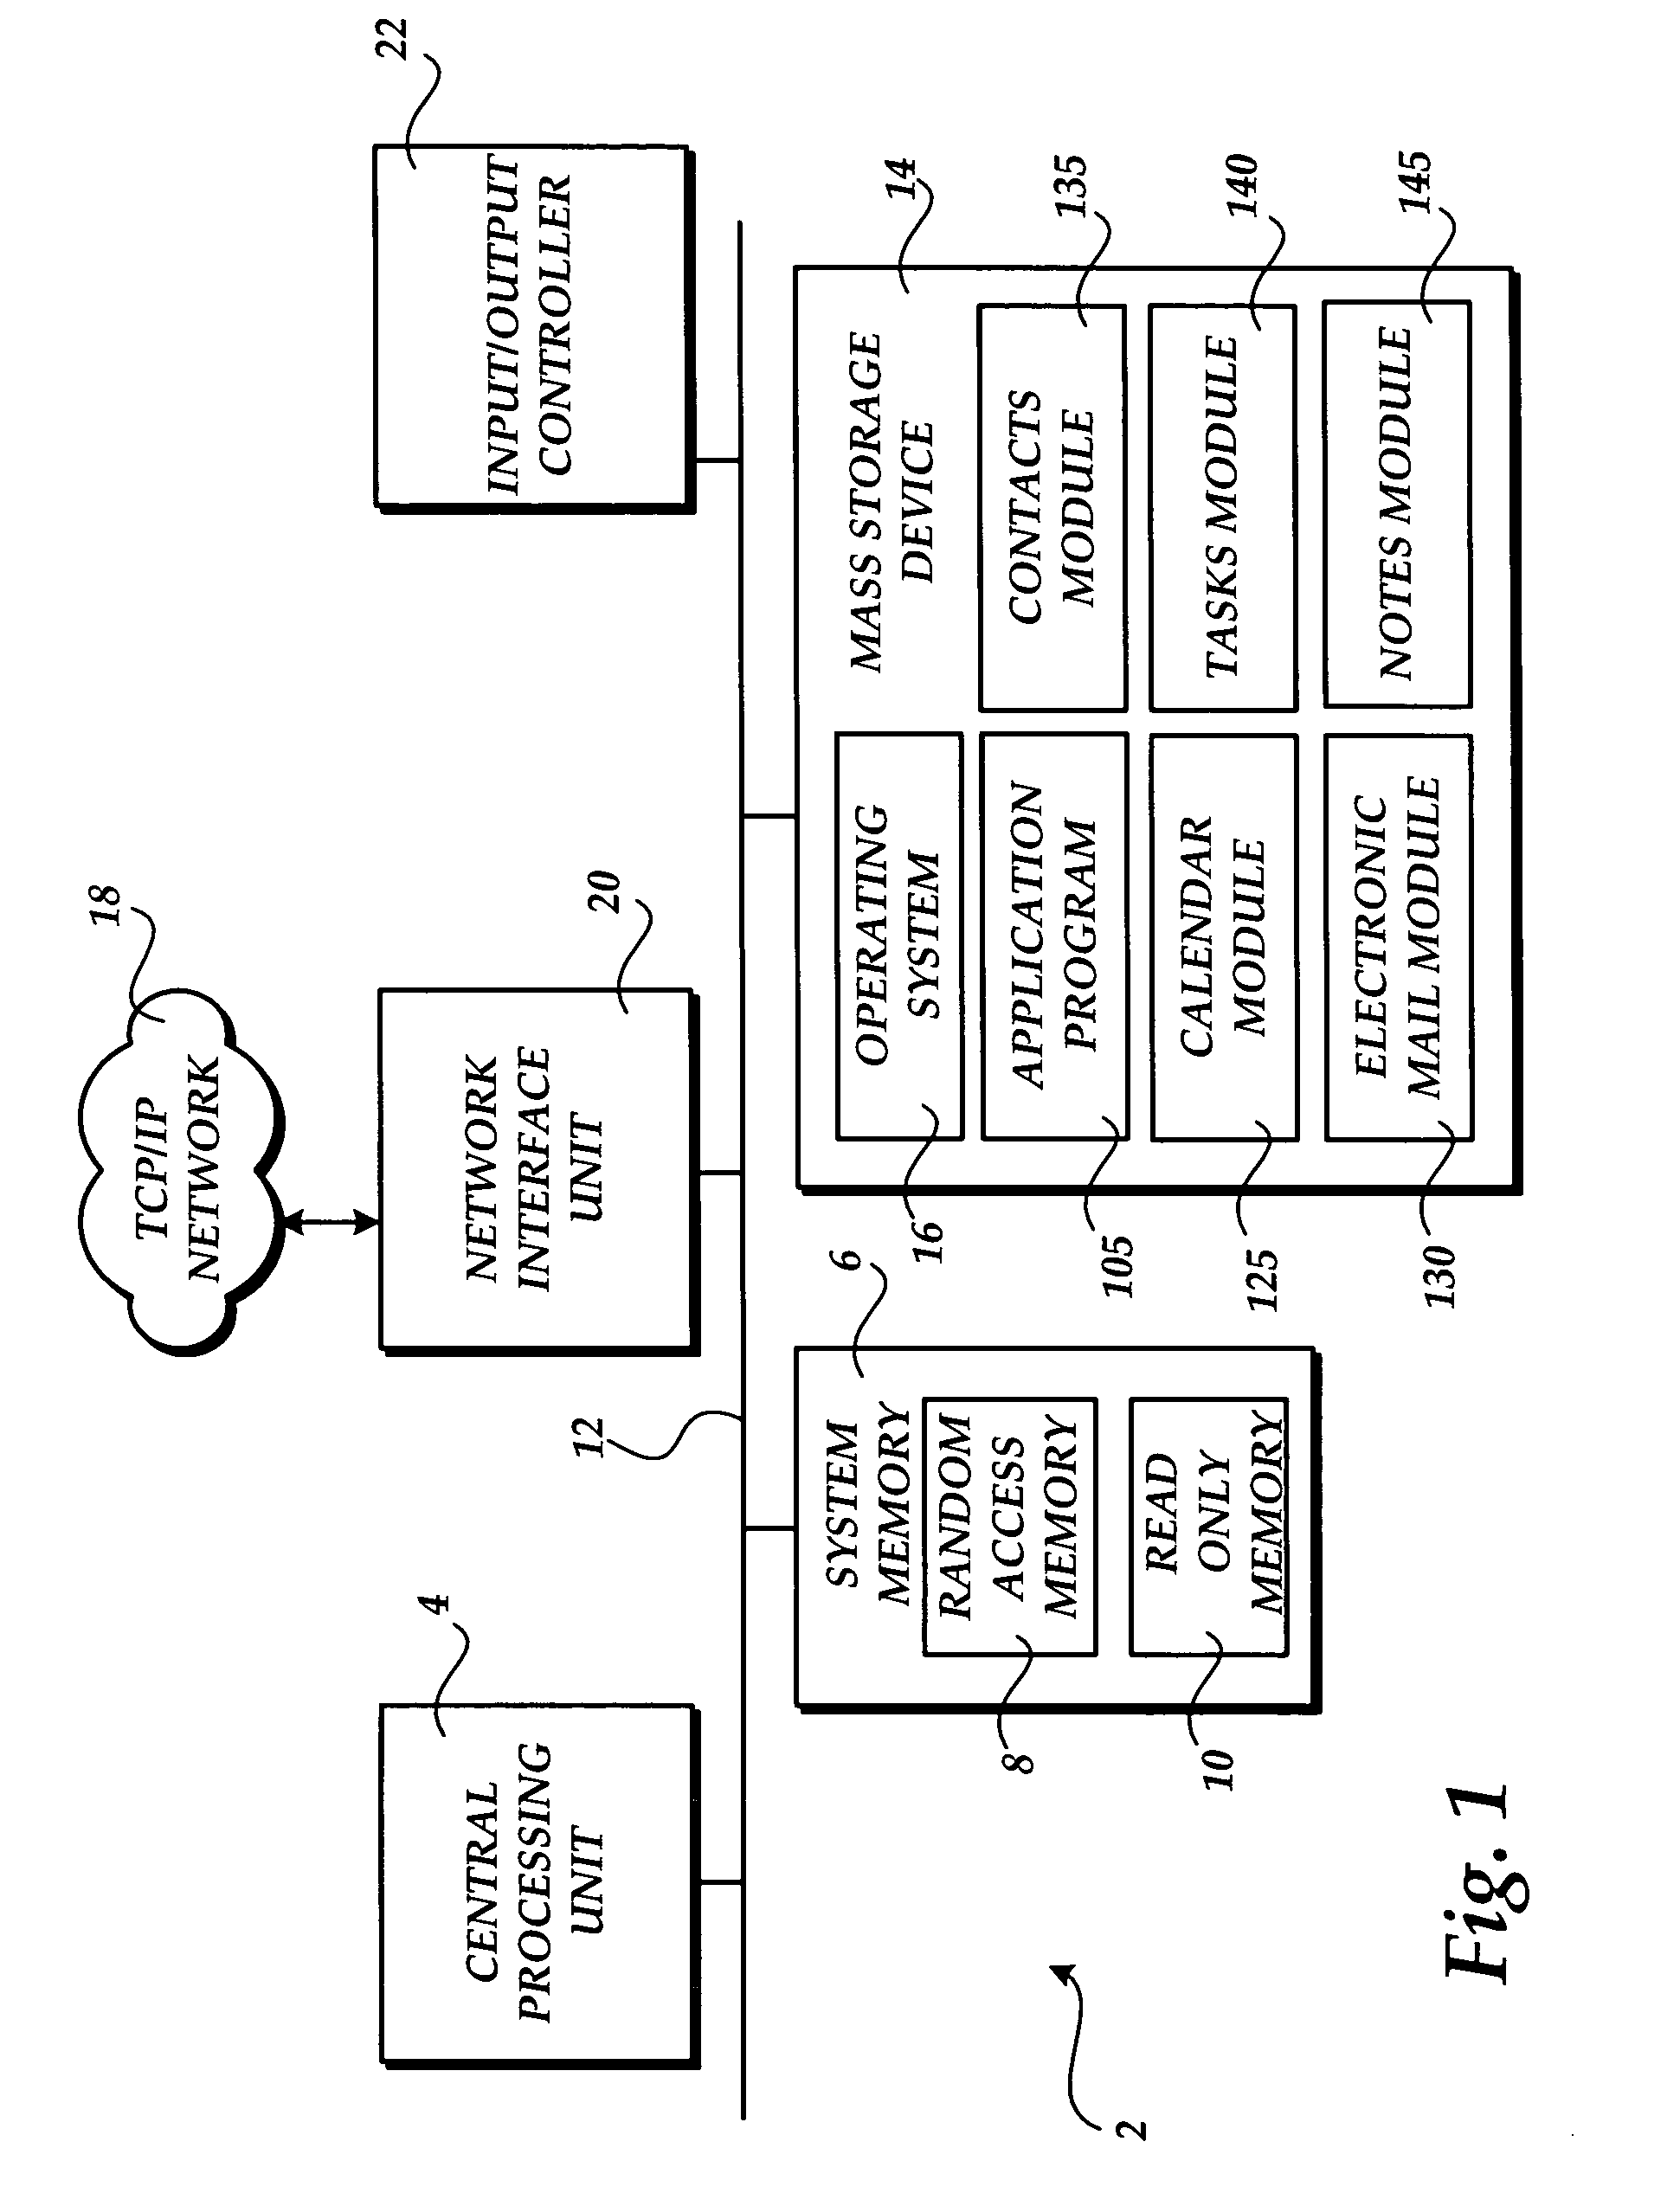 Method and system for improved electronic task flagging and management